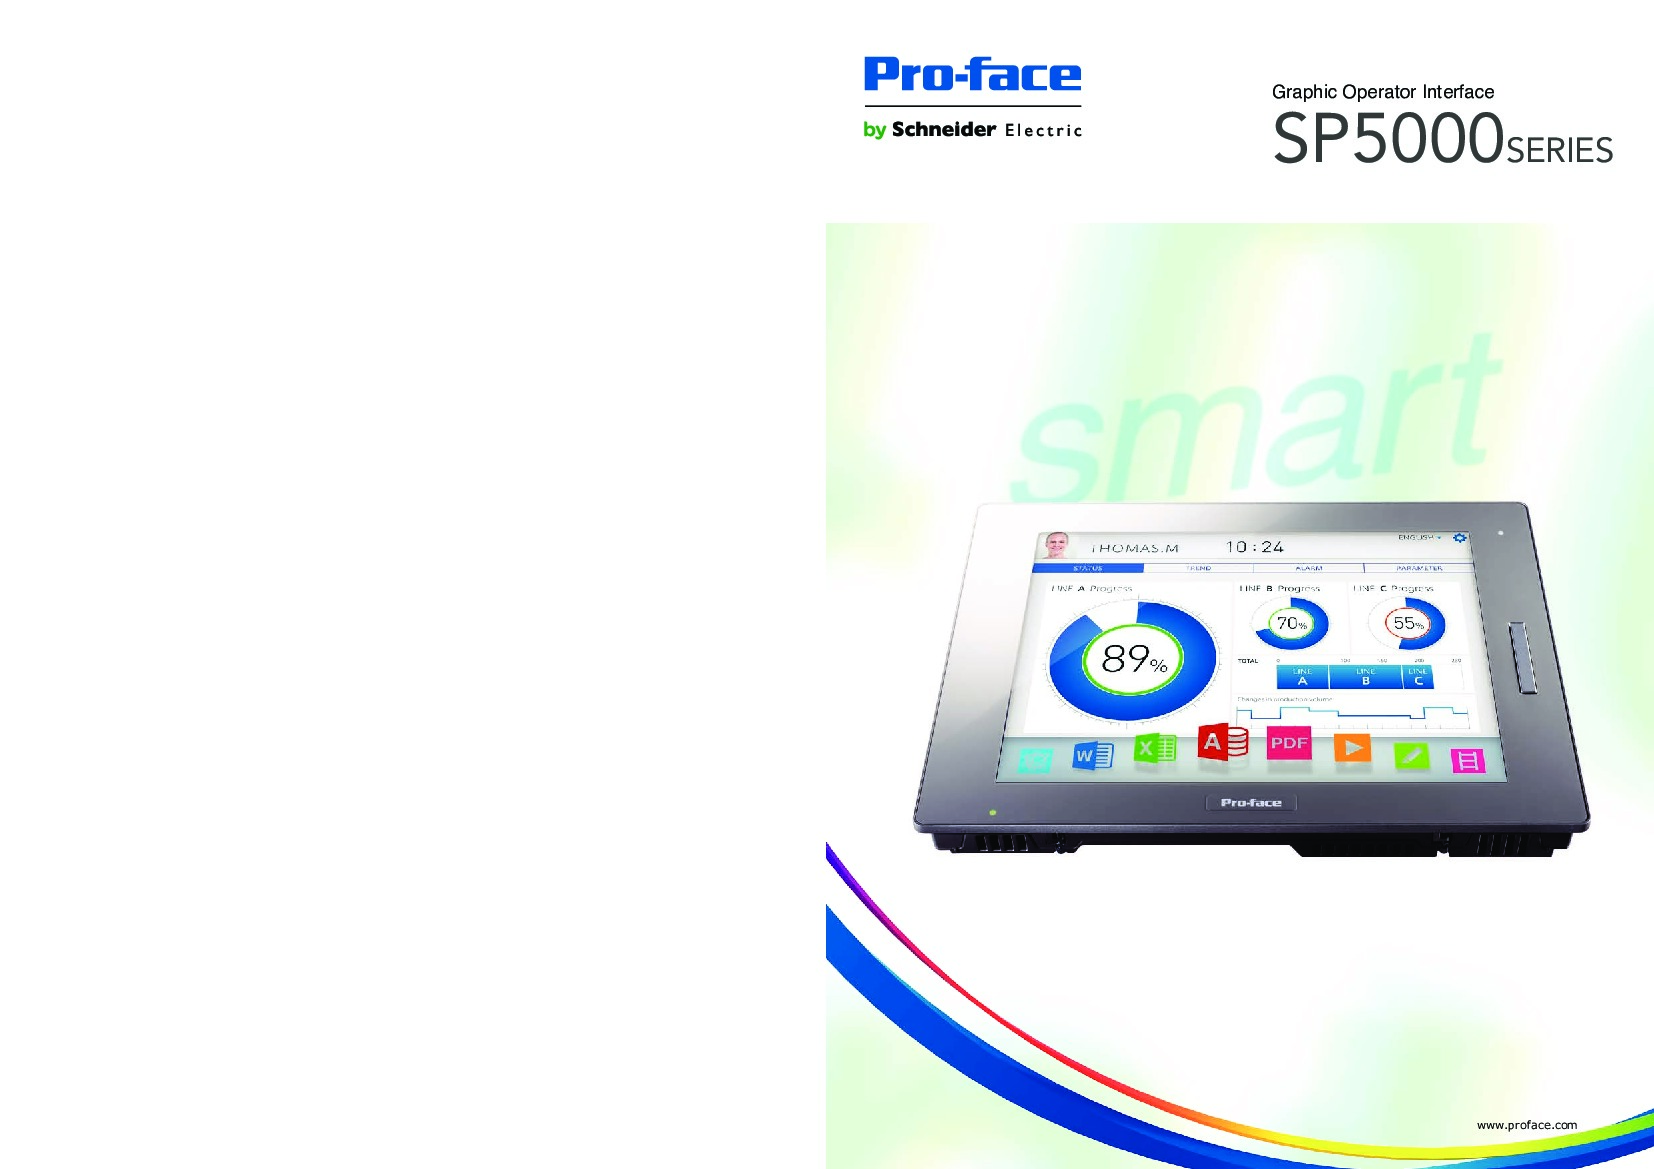 First Page Image of PFXSP5600TPD Pro-face SP5000 Catalog.pdf